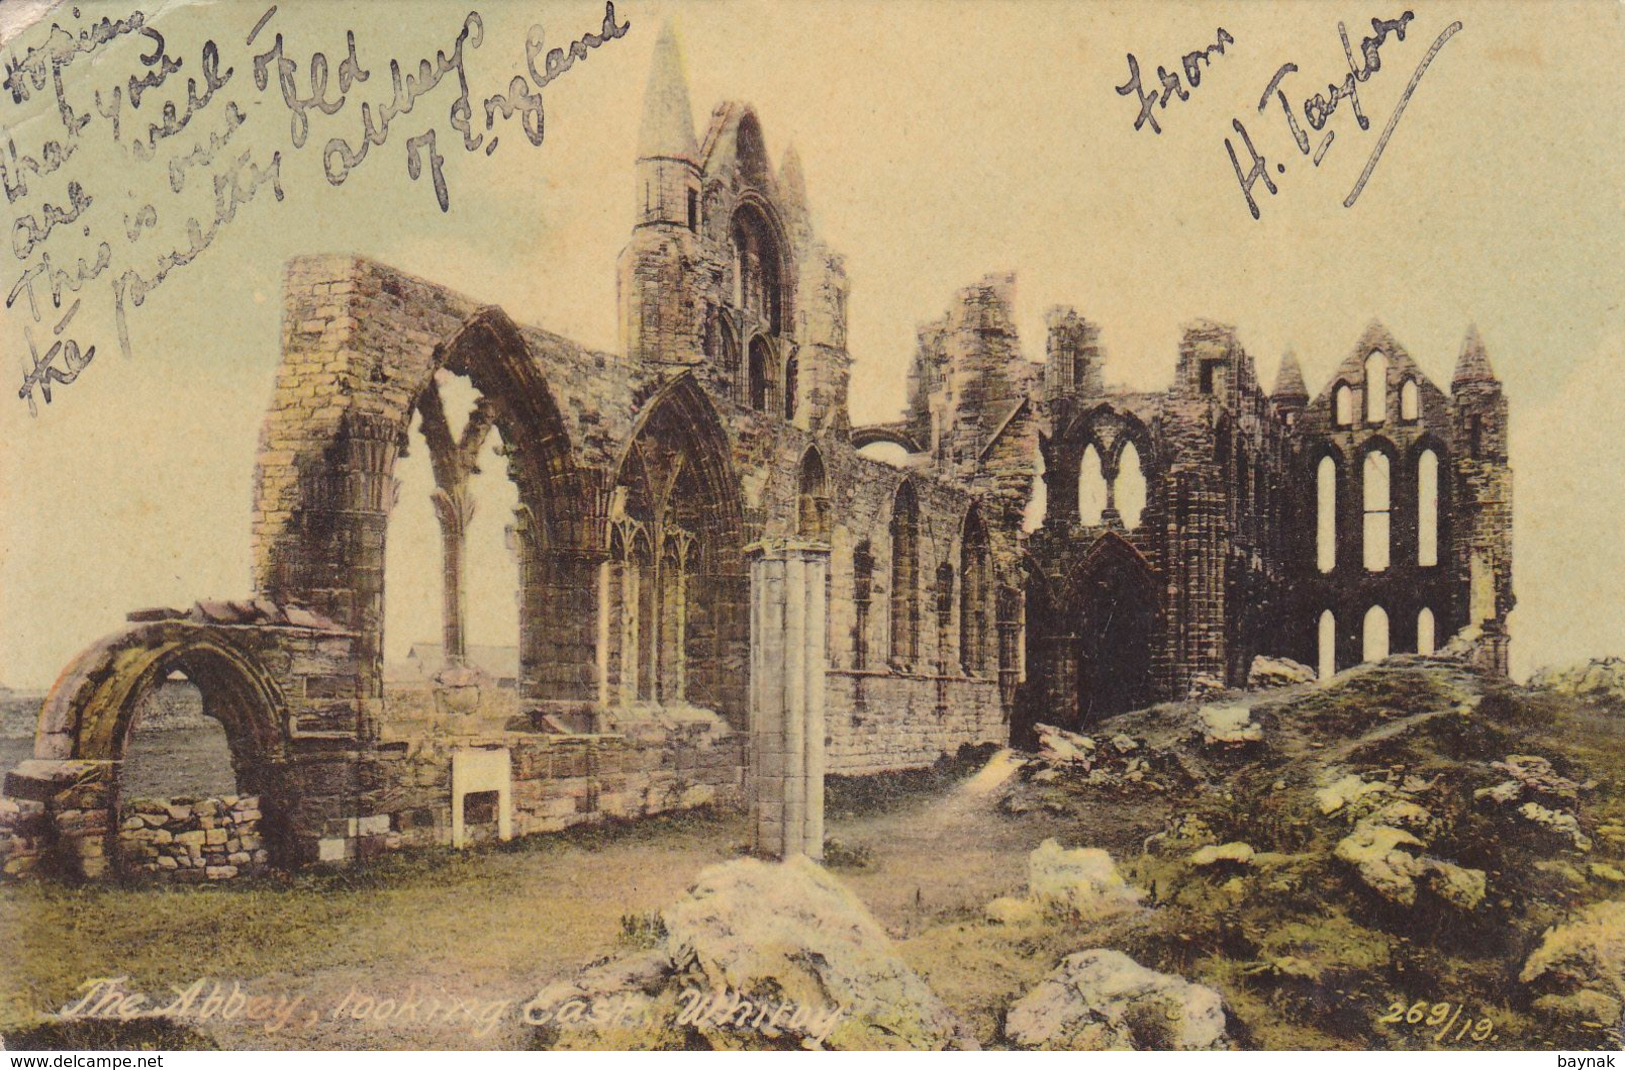 ENG74  --  WHITBY  -- THE ABBEY  --   1909 - Whitby